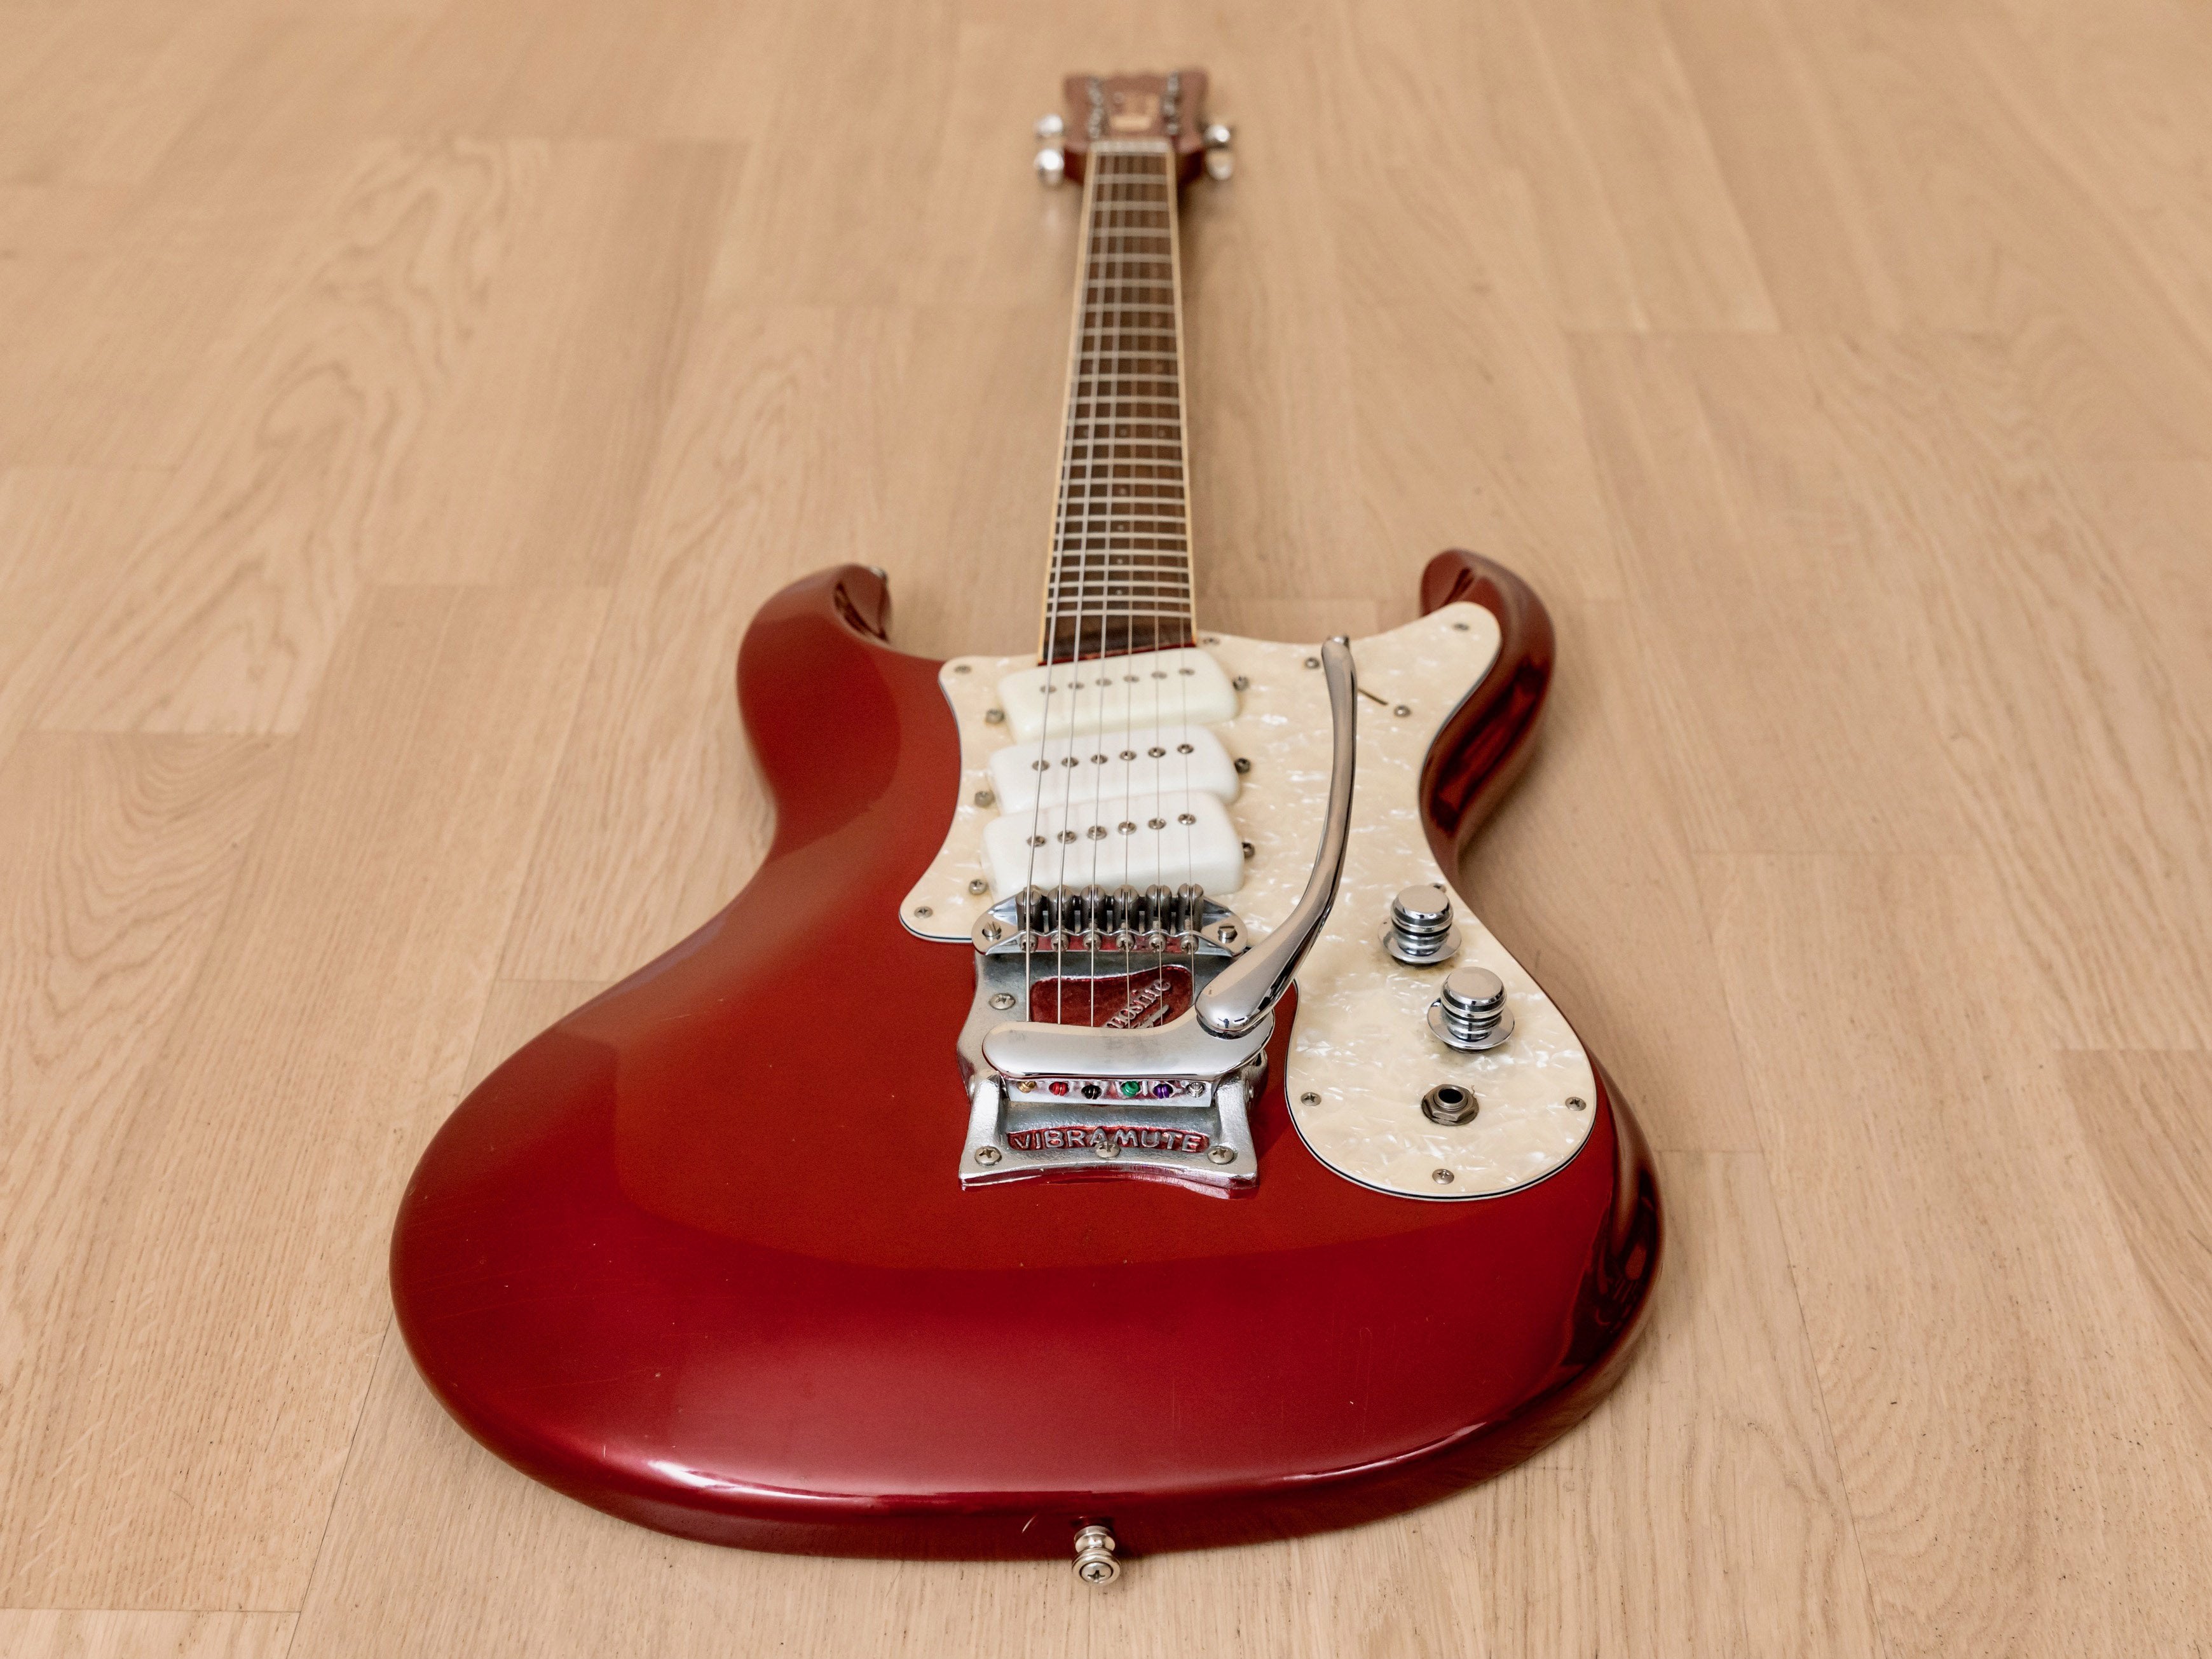 2004 Mosrite Eurorite 3 Pickup Non-Production Ventures-Style Guitar, Candy Apple Red w/ Case, Fillmore